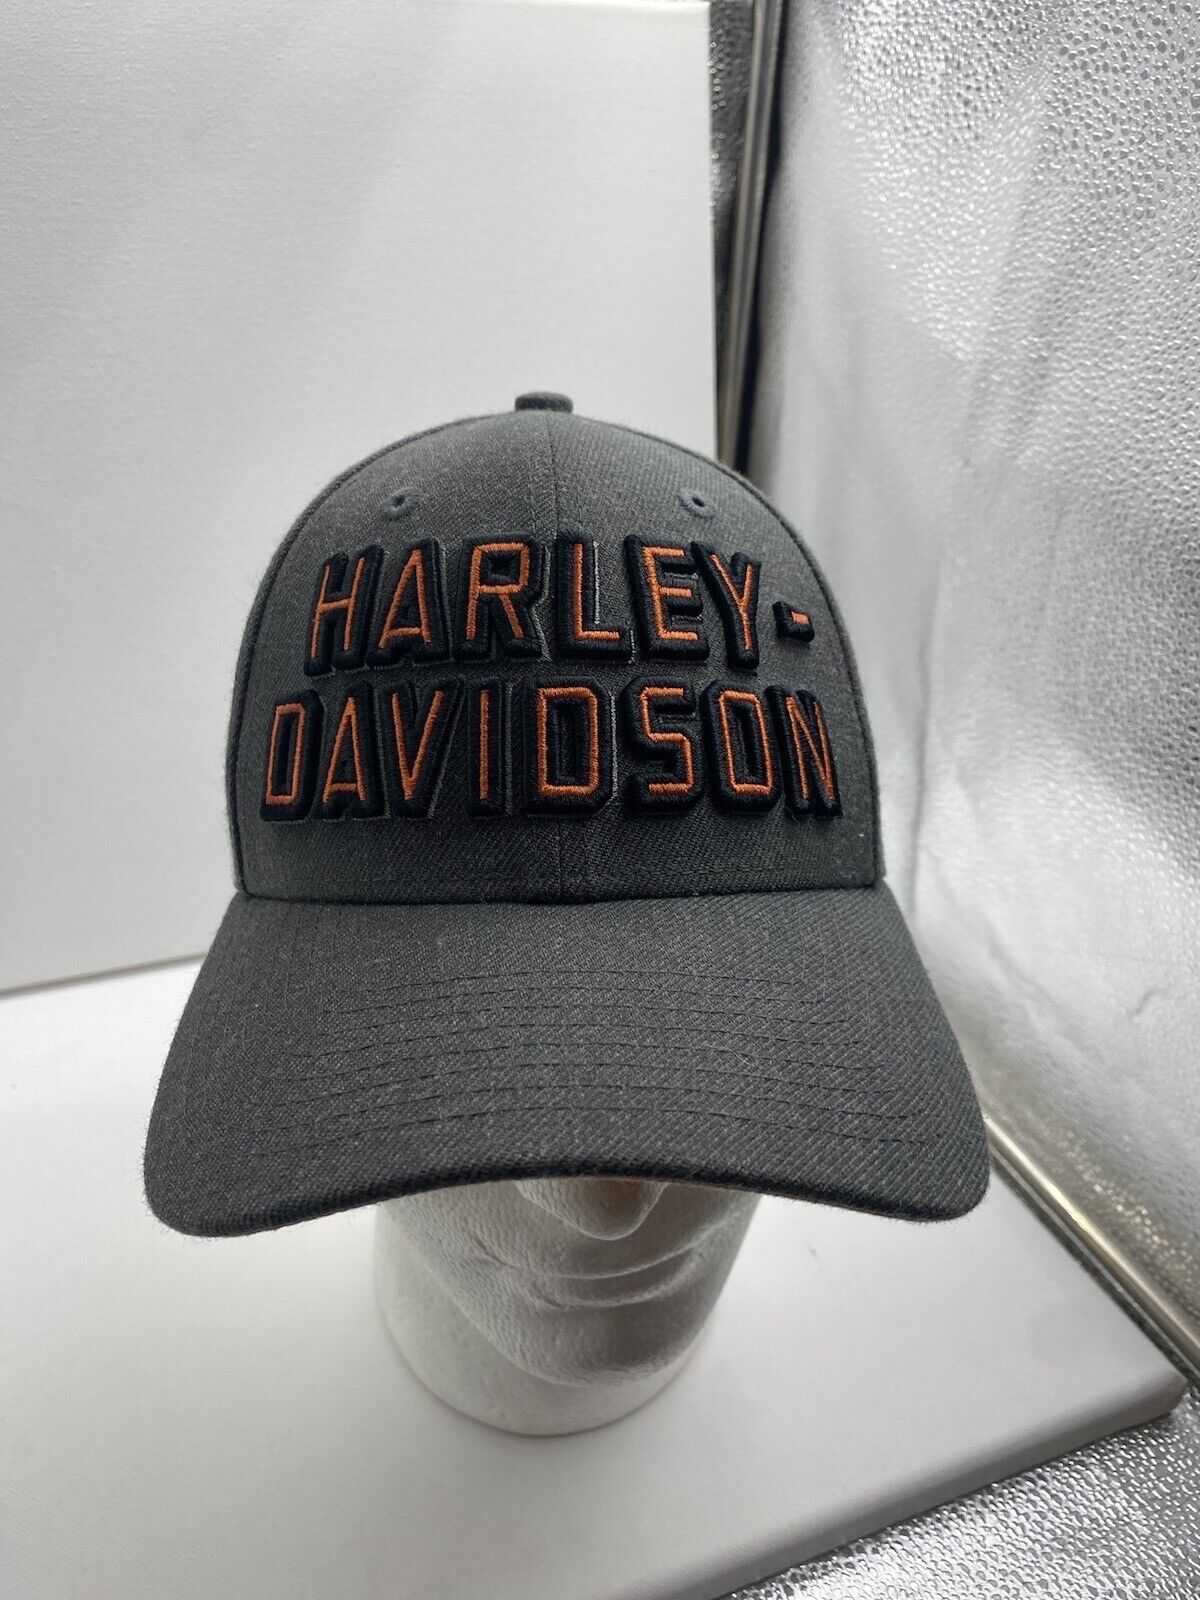 Harley-Davidson Men's Embroidered Graphic 9FORTY Cap, Gray - 99420-20VM